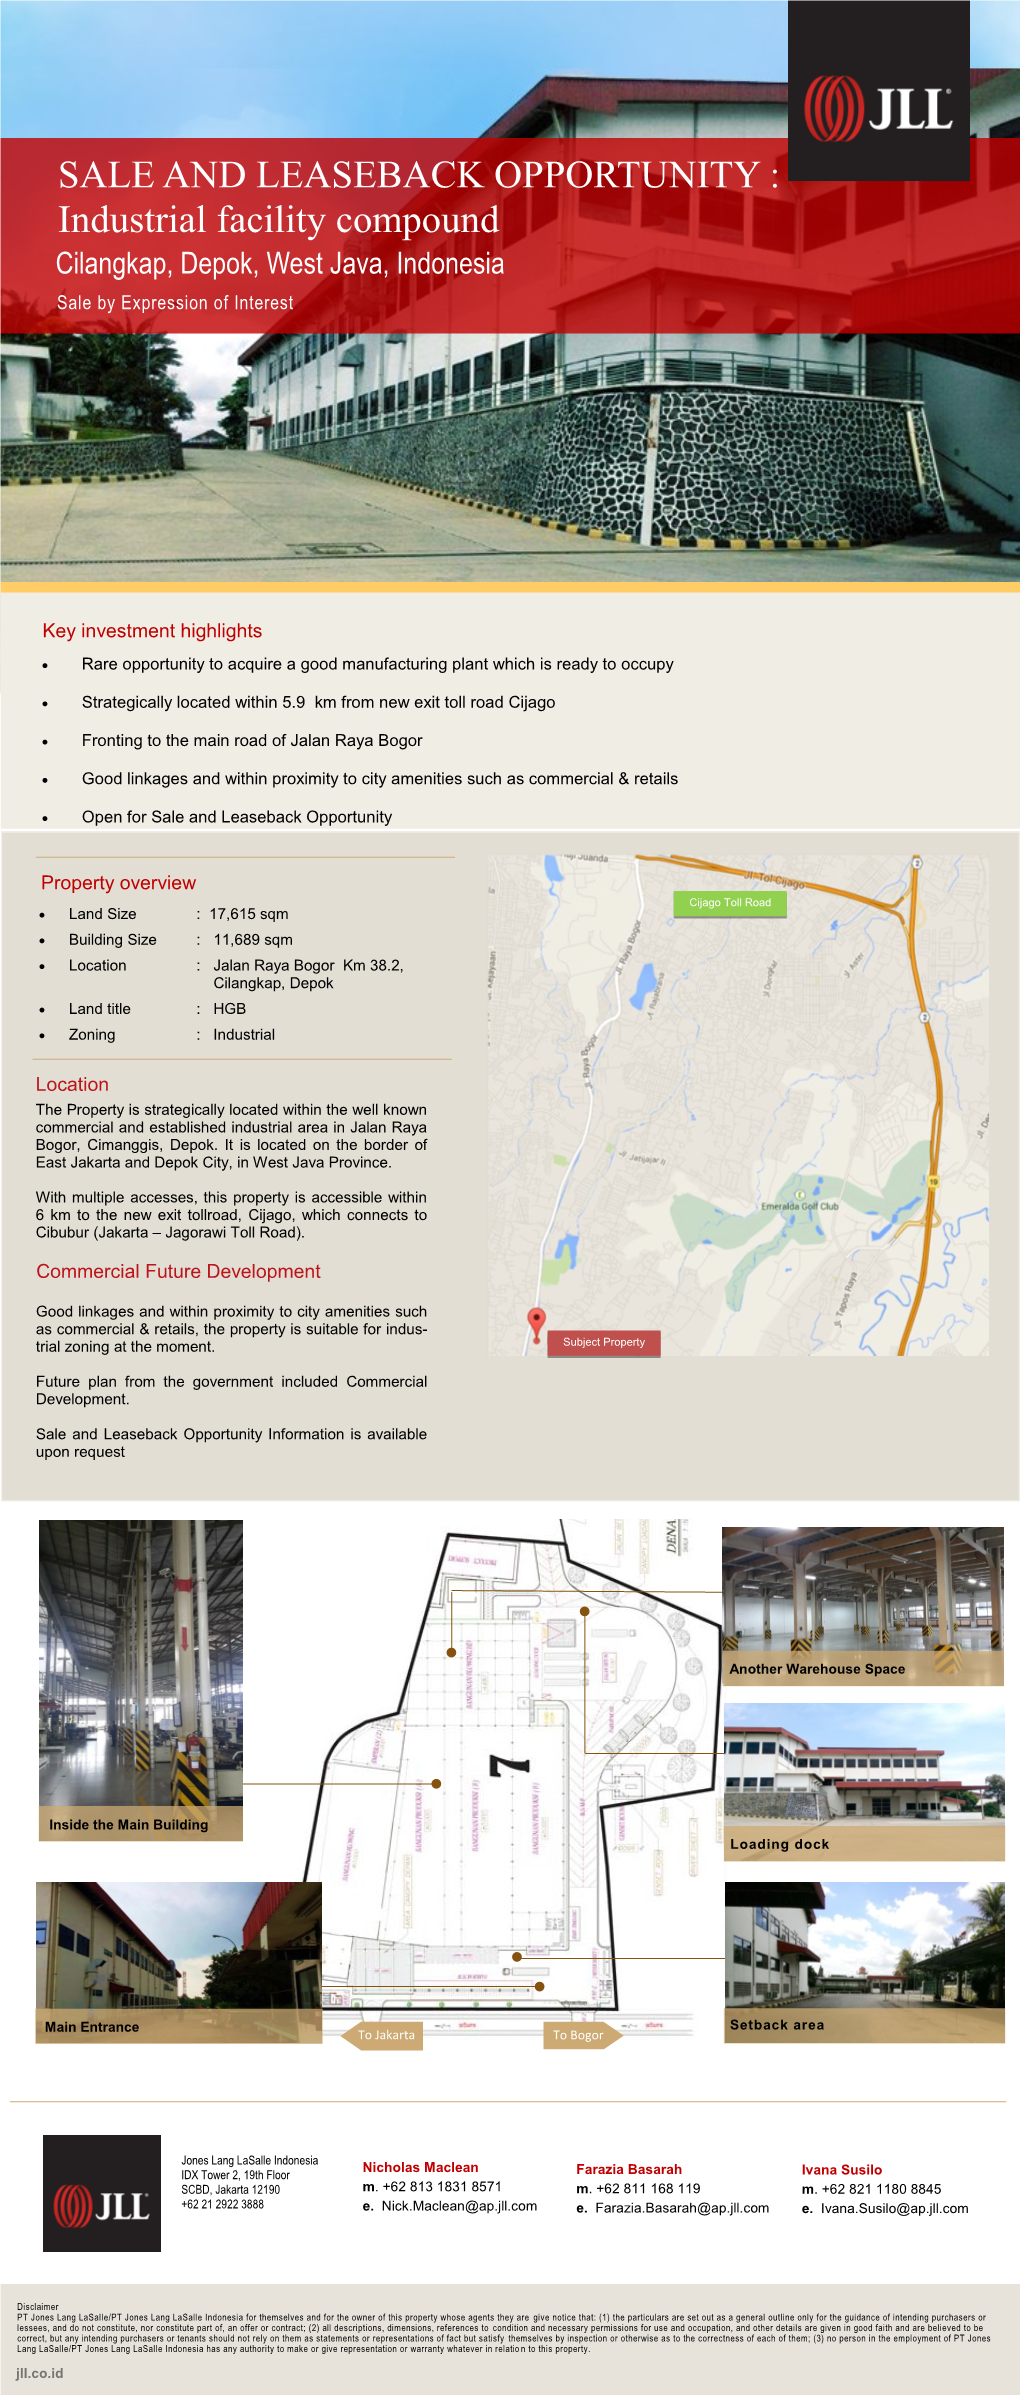 SALE and LEASEBACK OPPORTUNITY : Industrial Facility Compound Cilangkap, Depok, West Java, Indonesia